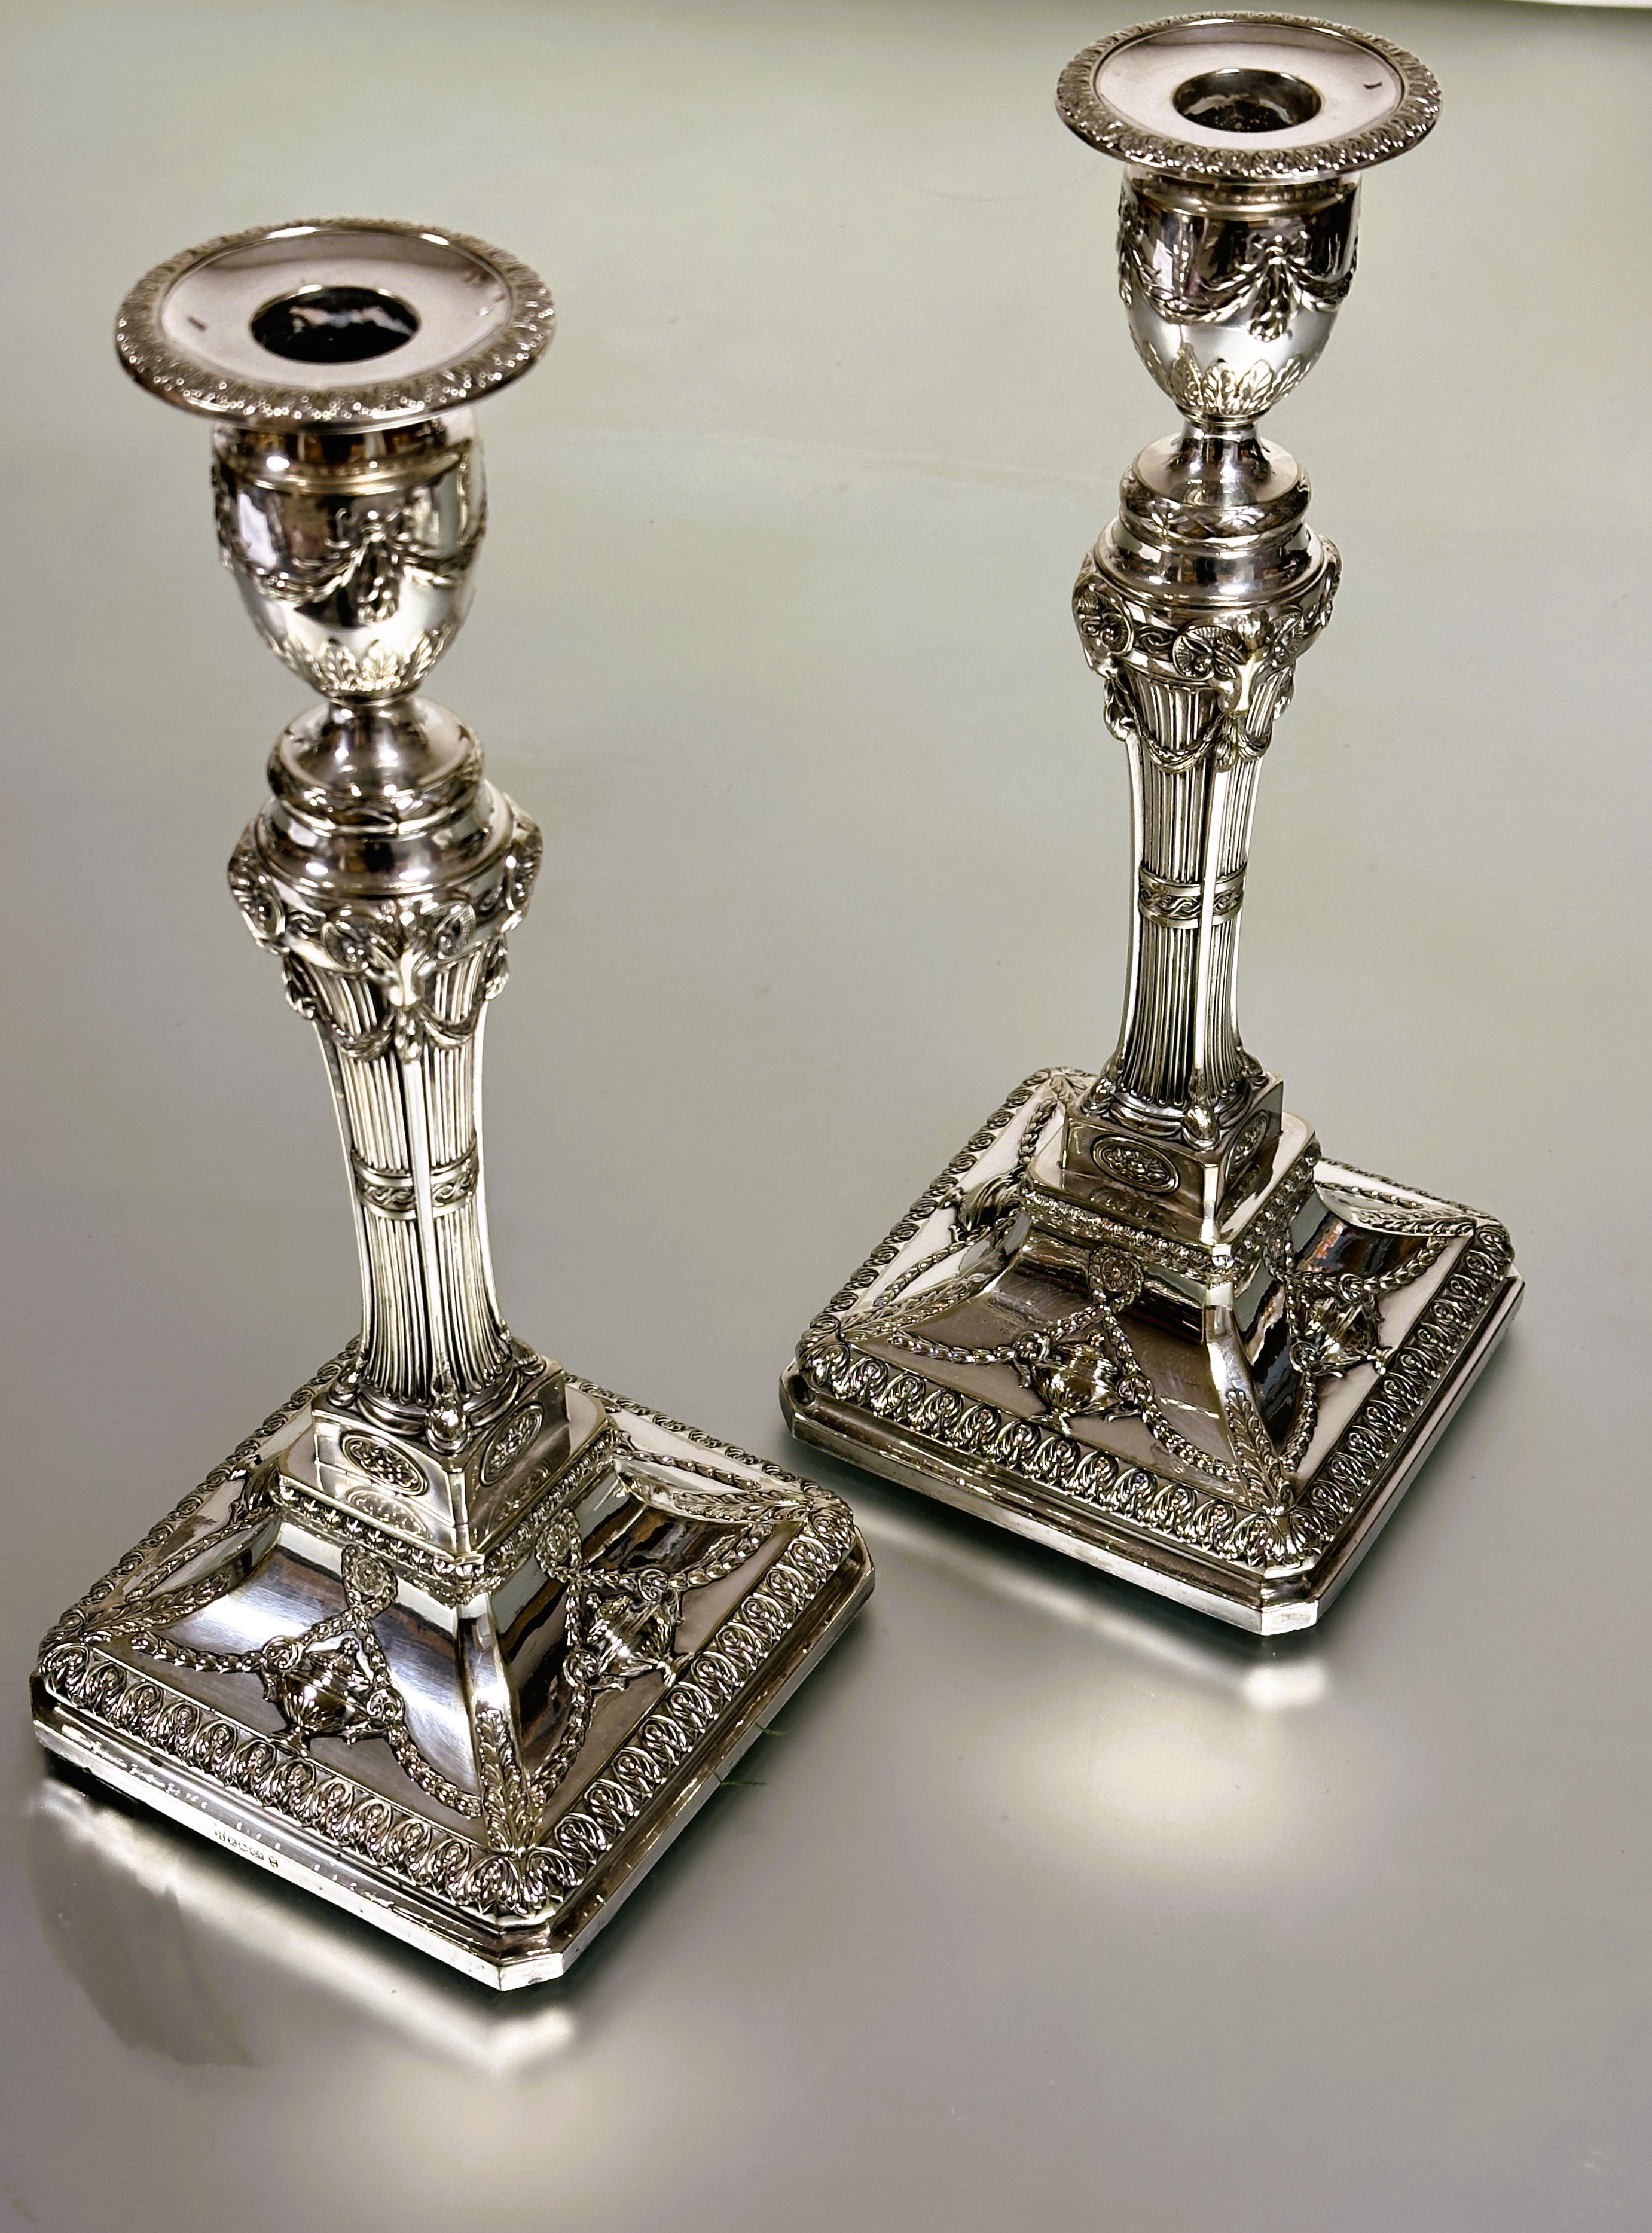 A pair of Edwardian Hawksworth, Eyre and Company fine quality Neo Classical Revival table candle